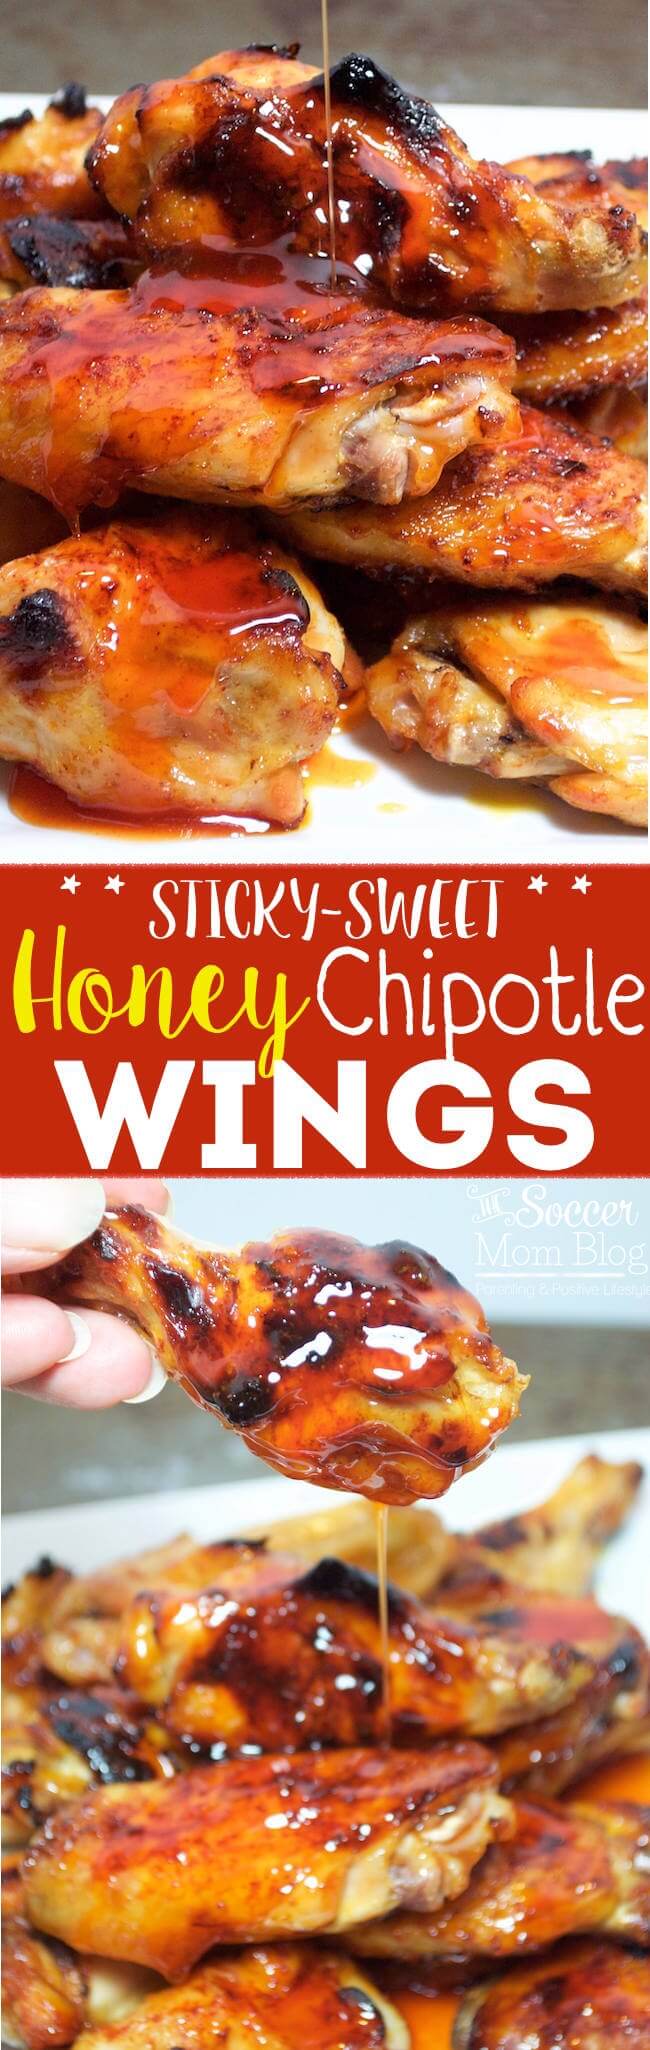 A drool-worthy combination of crispy and sticky-sweet on the outside and tender on the inside. These honey chipotle wings are a killer appetizer recipe!